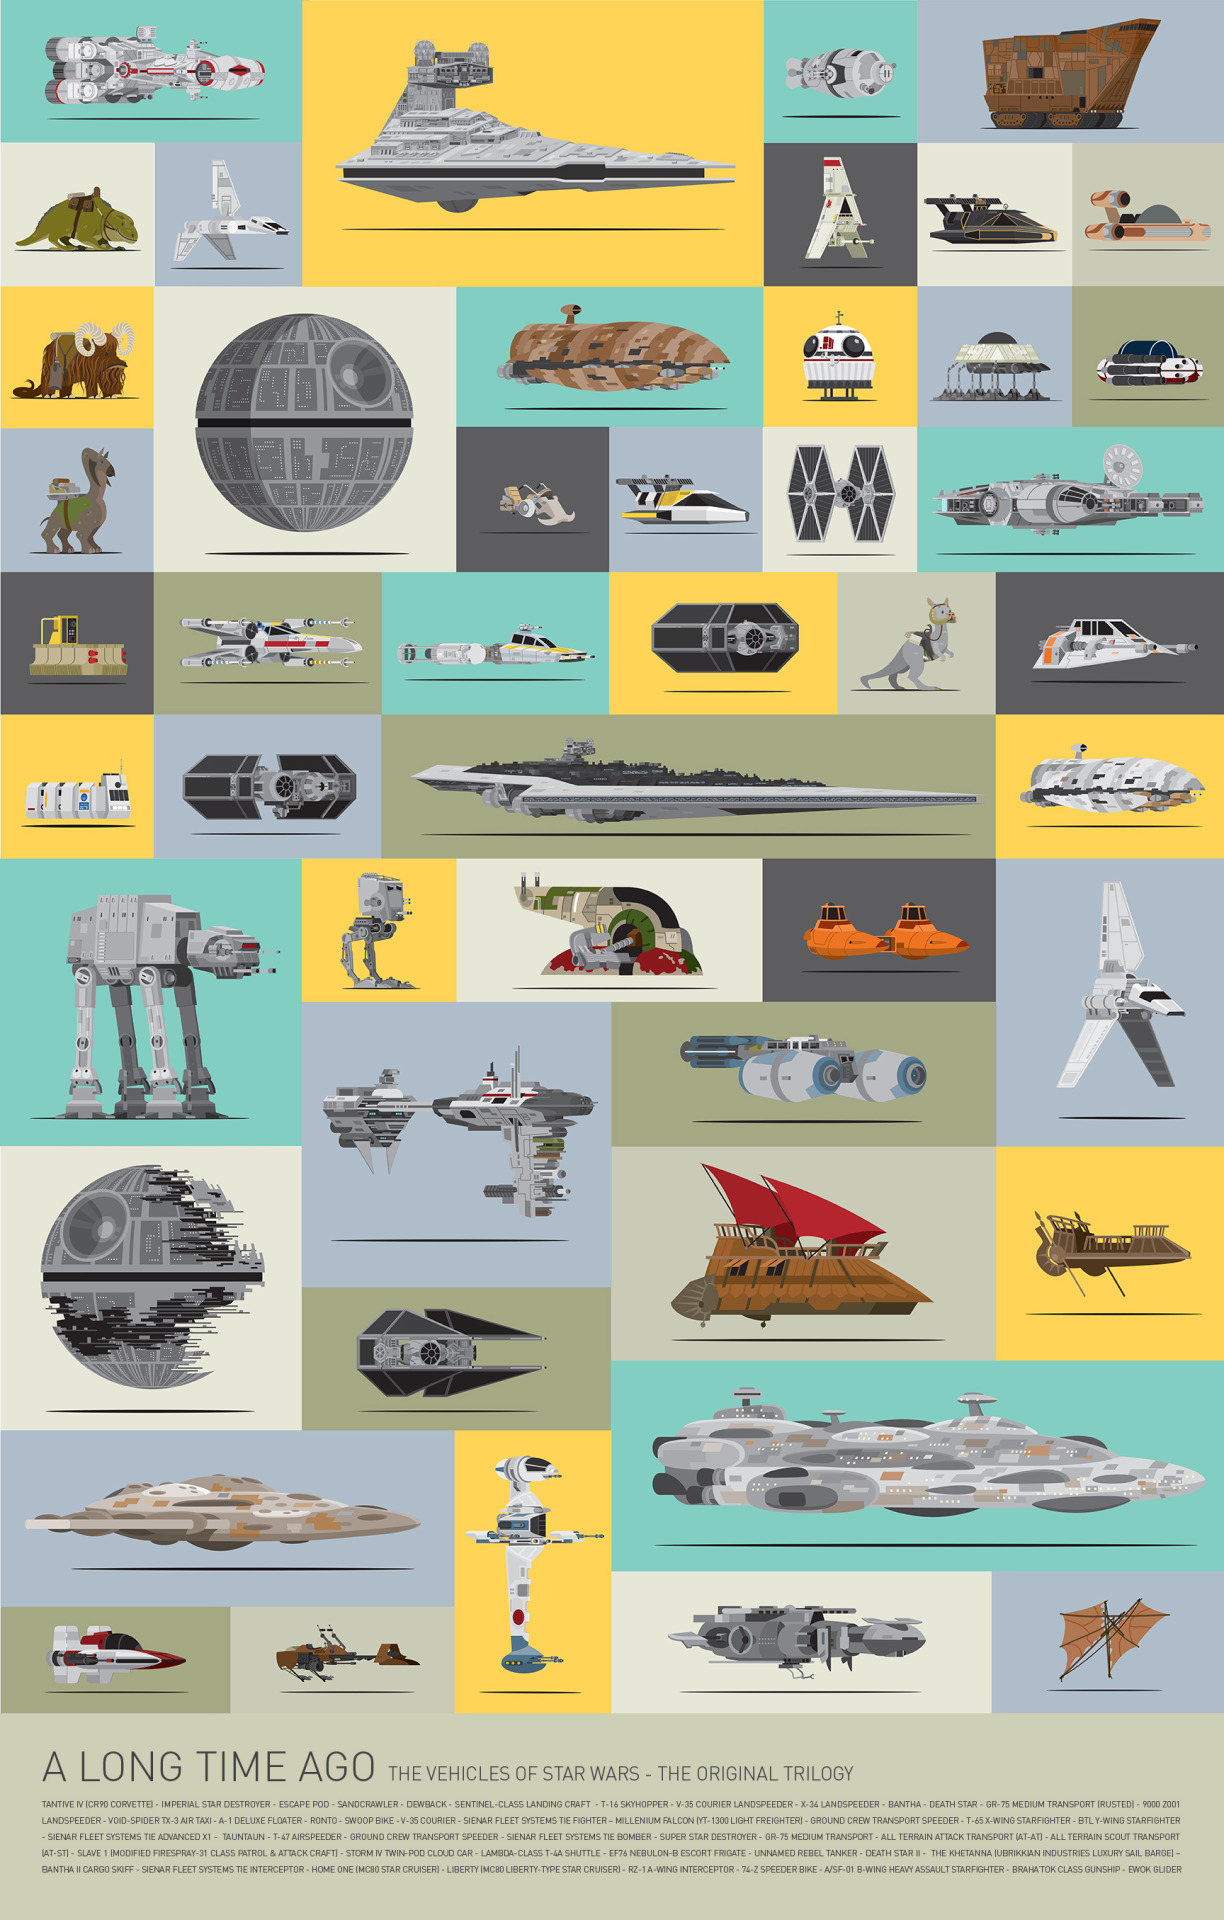 All The Awesome Spaceships And Vehicles Of Star Wars in One Cool Graphic